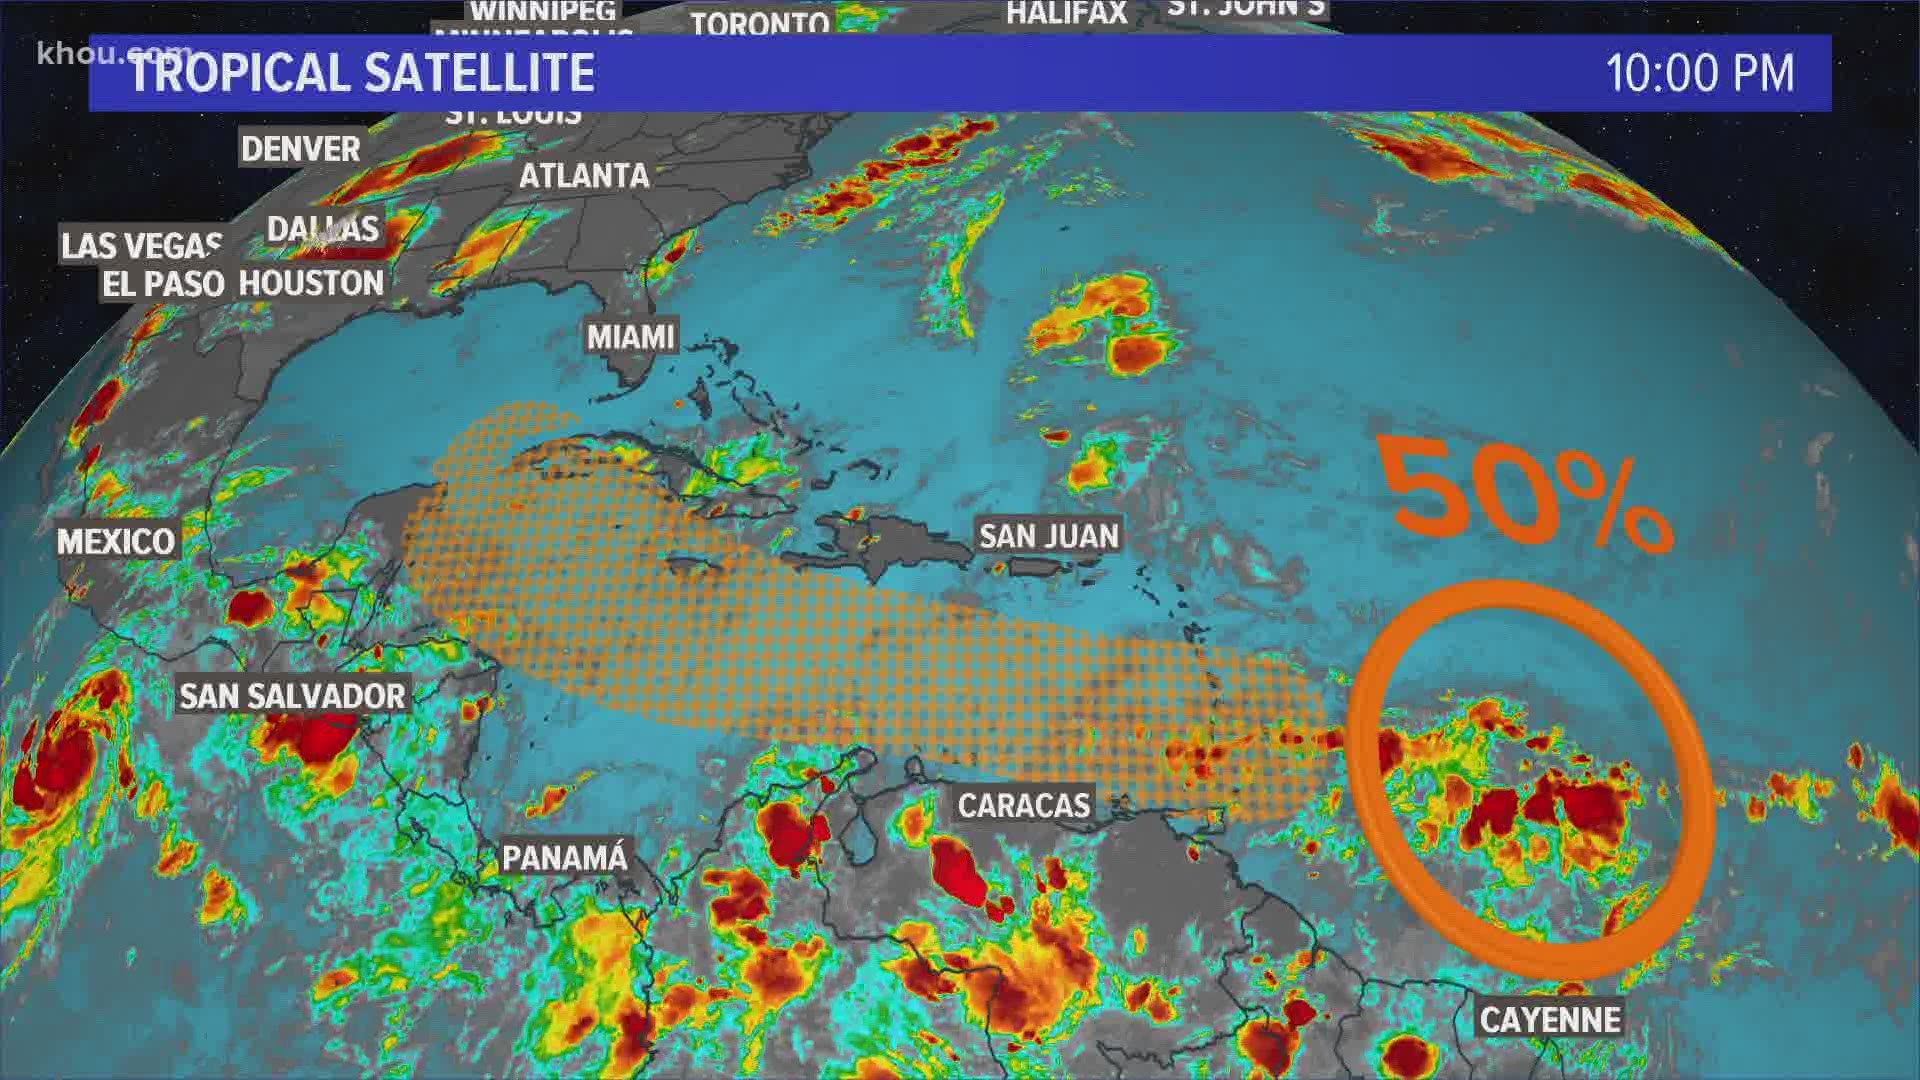 Two systems have 50 percent chance of development. They're two systems we'll be watching closely.